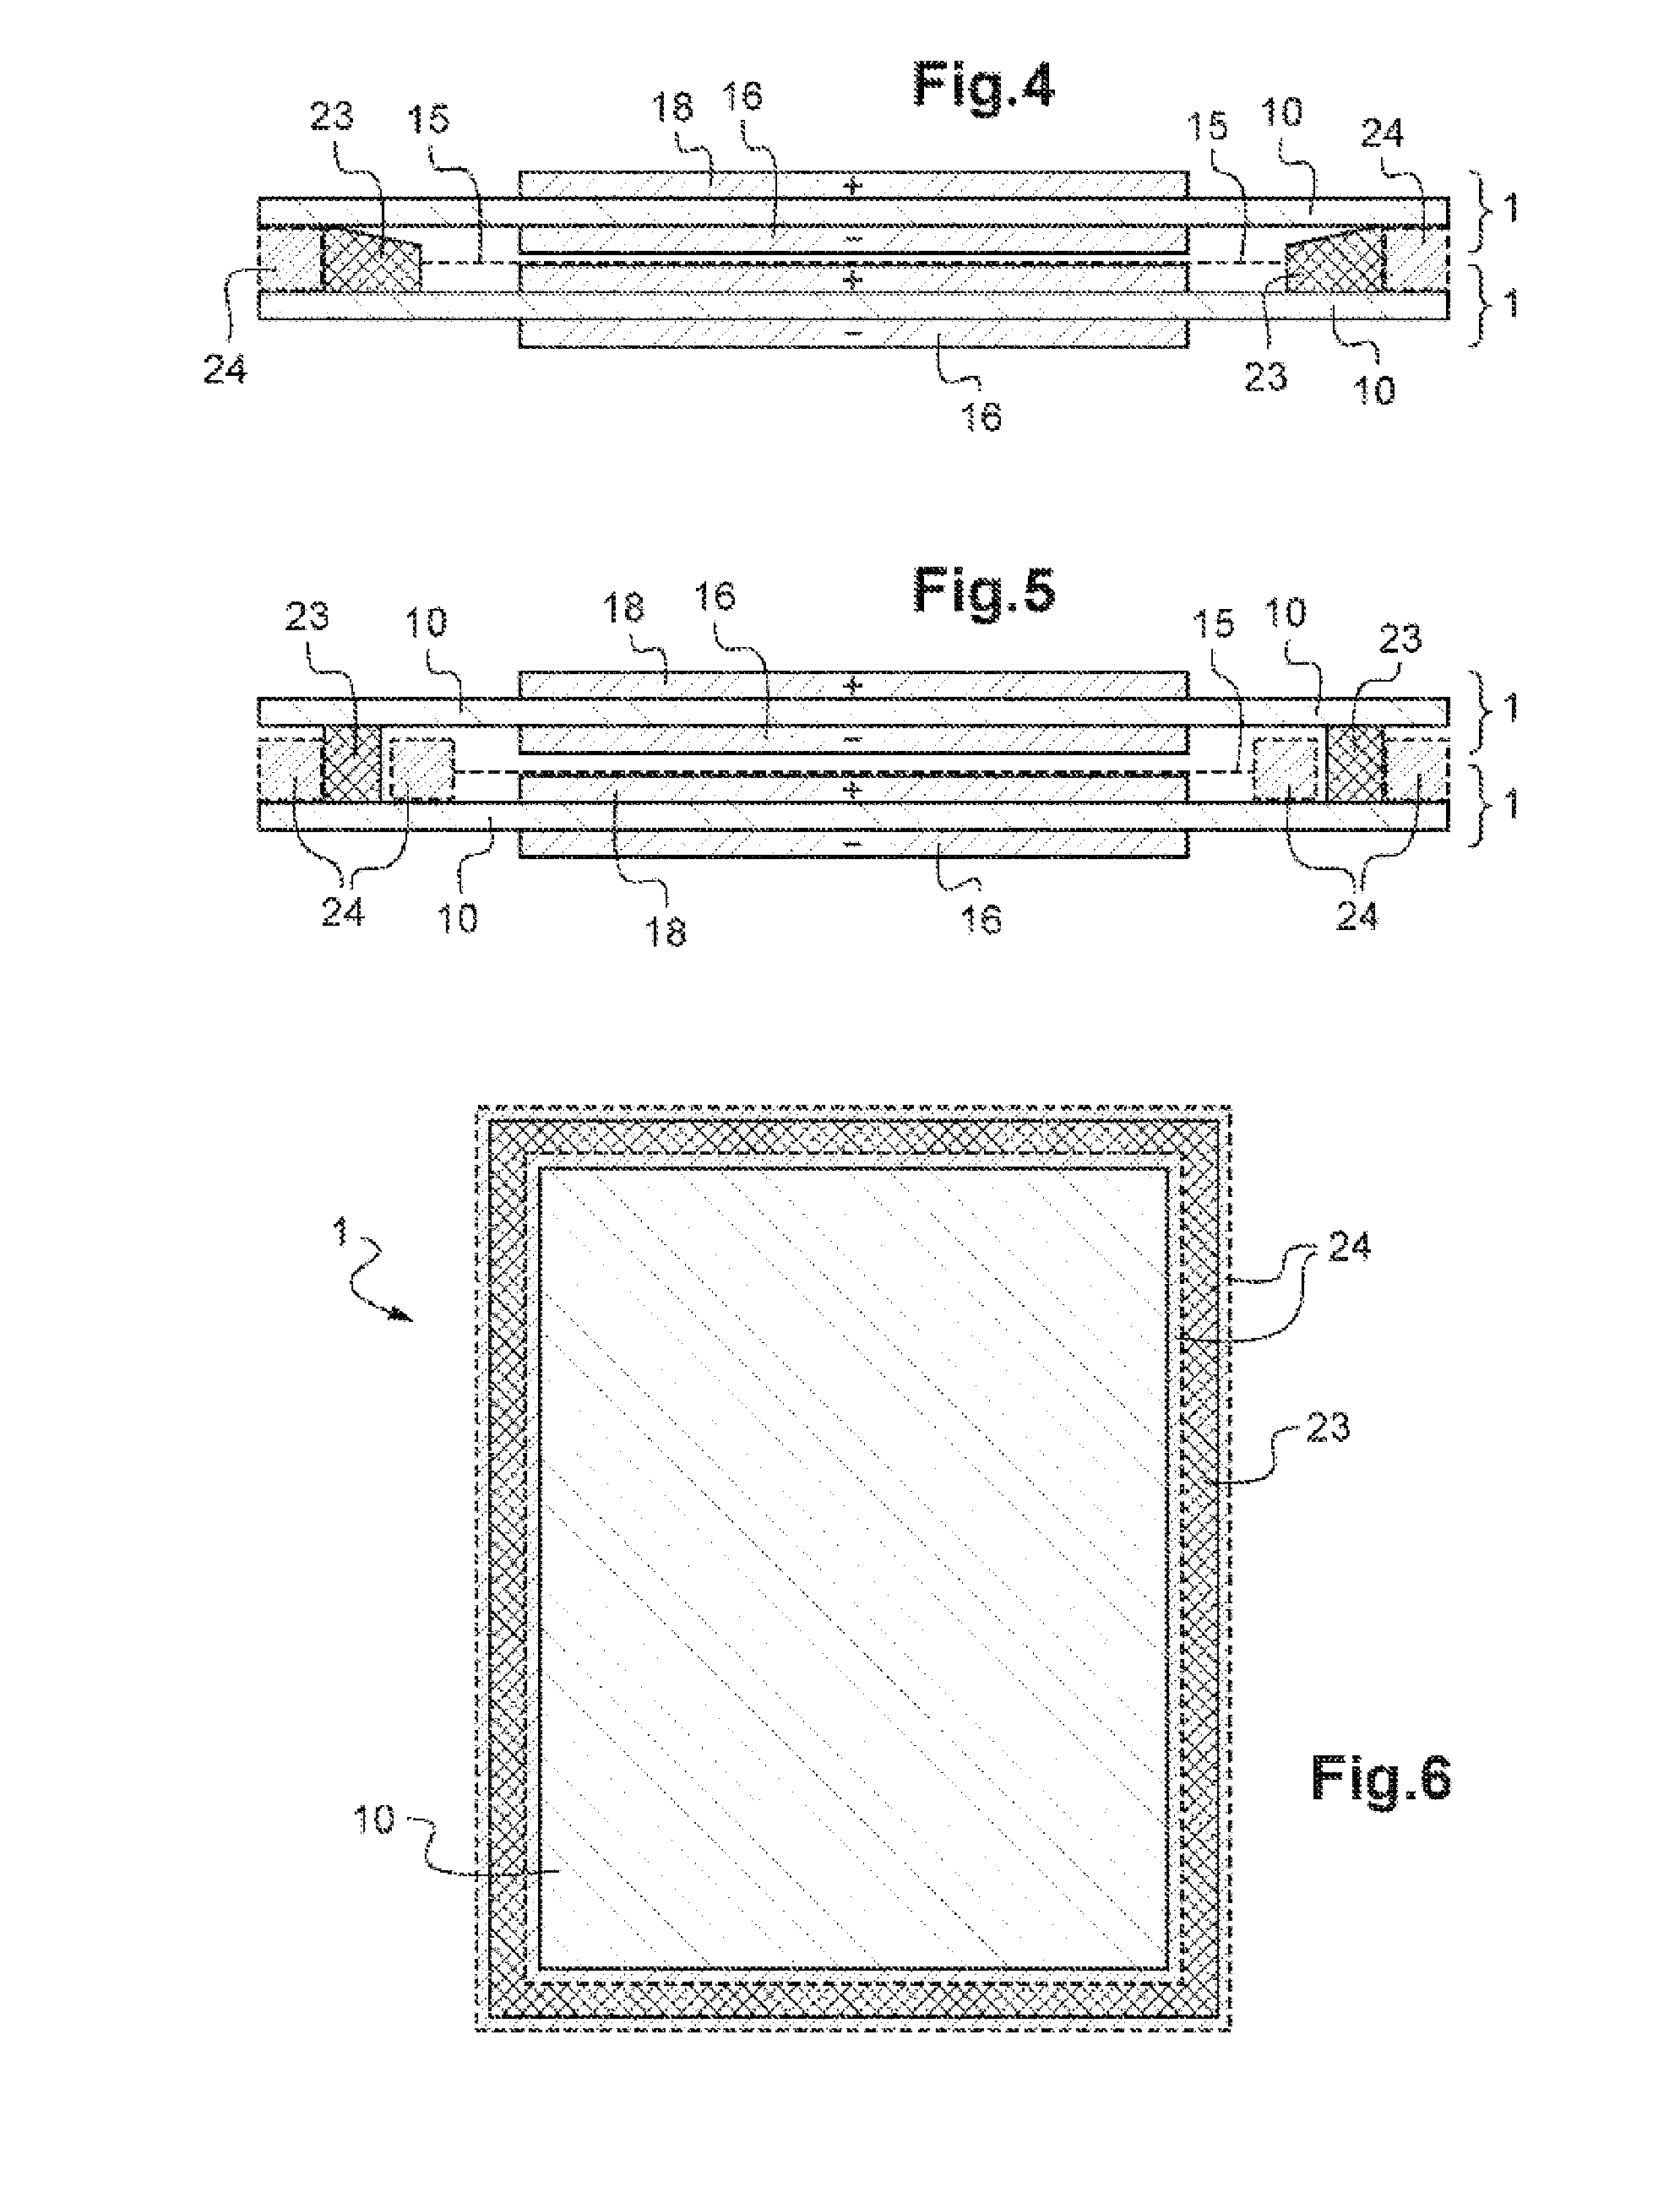 Bipolar li-ion battery having improved sealing and associated method of production